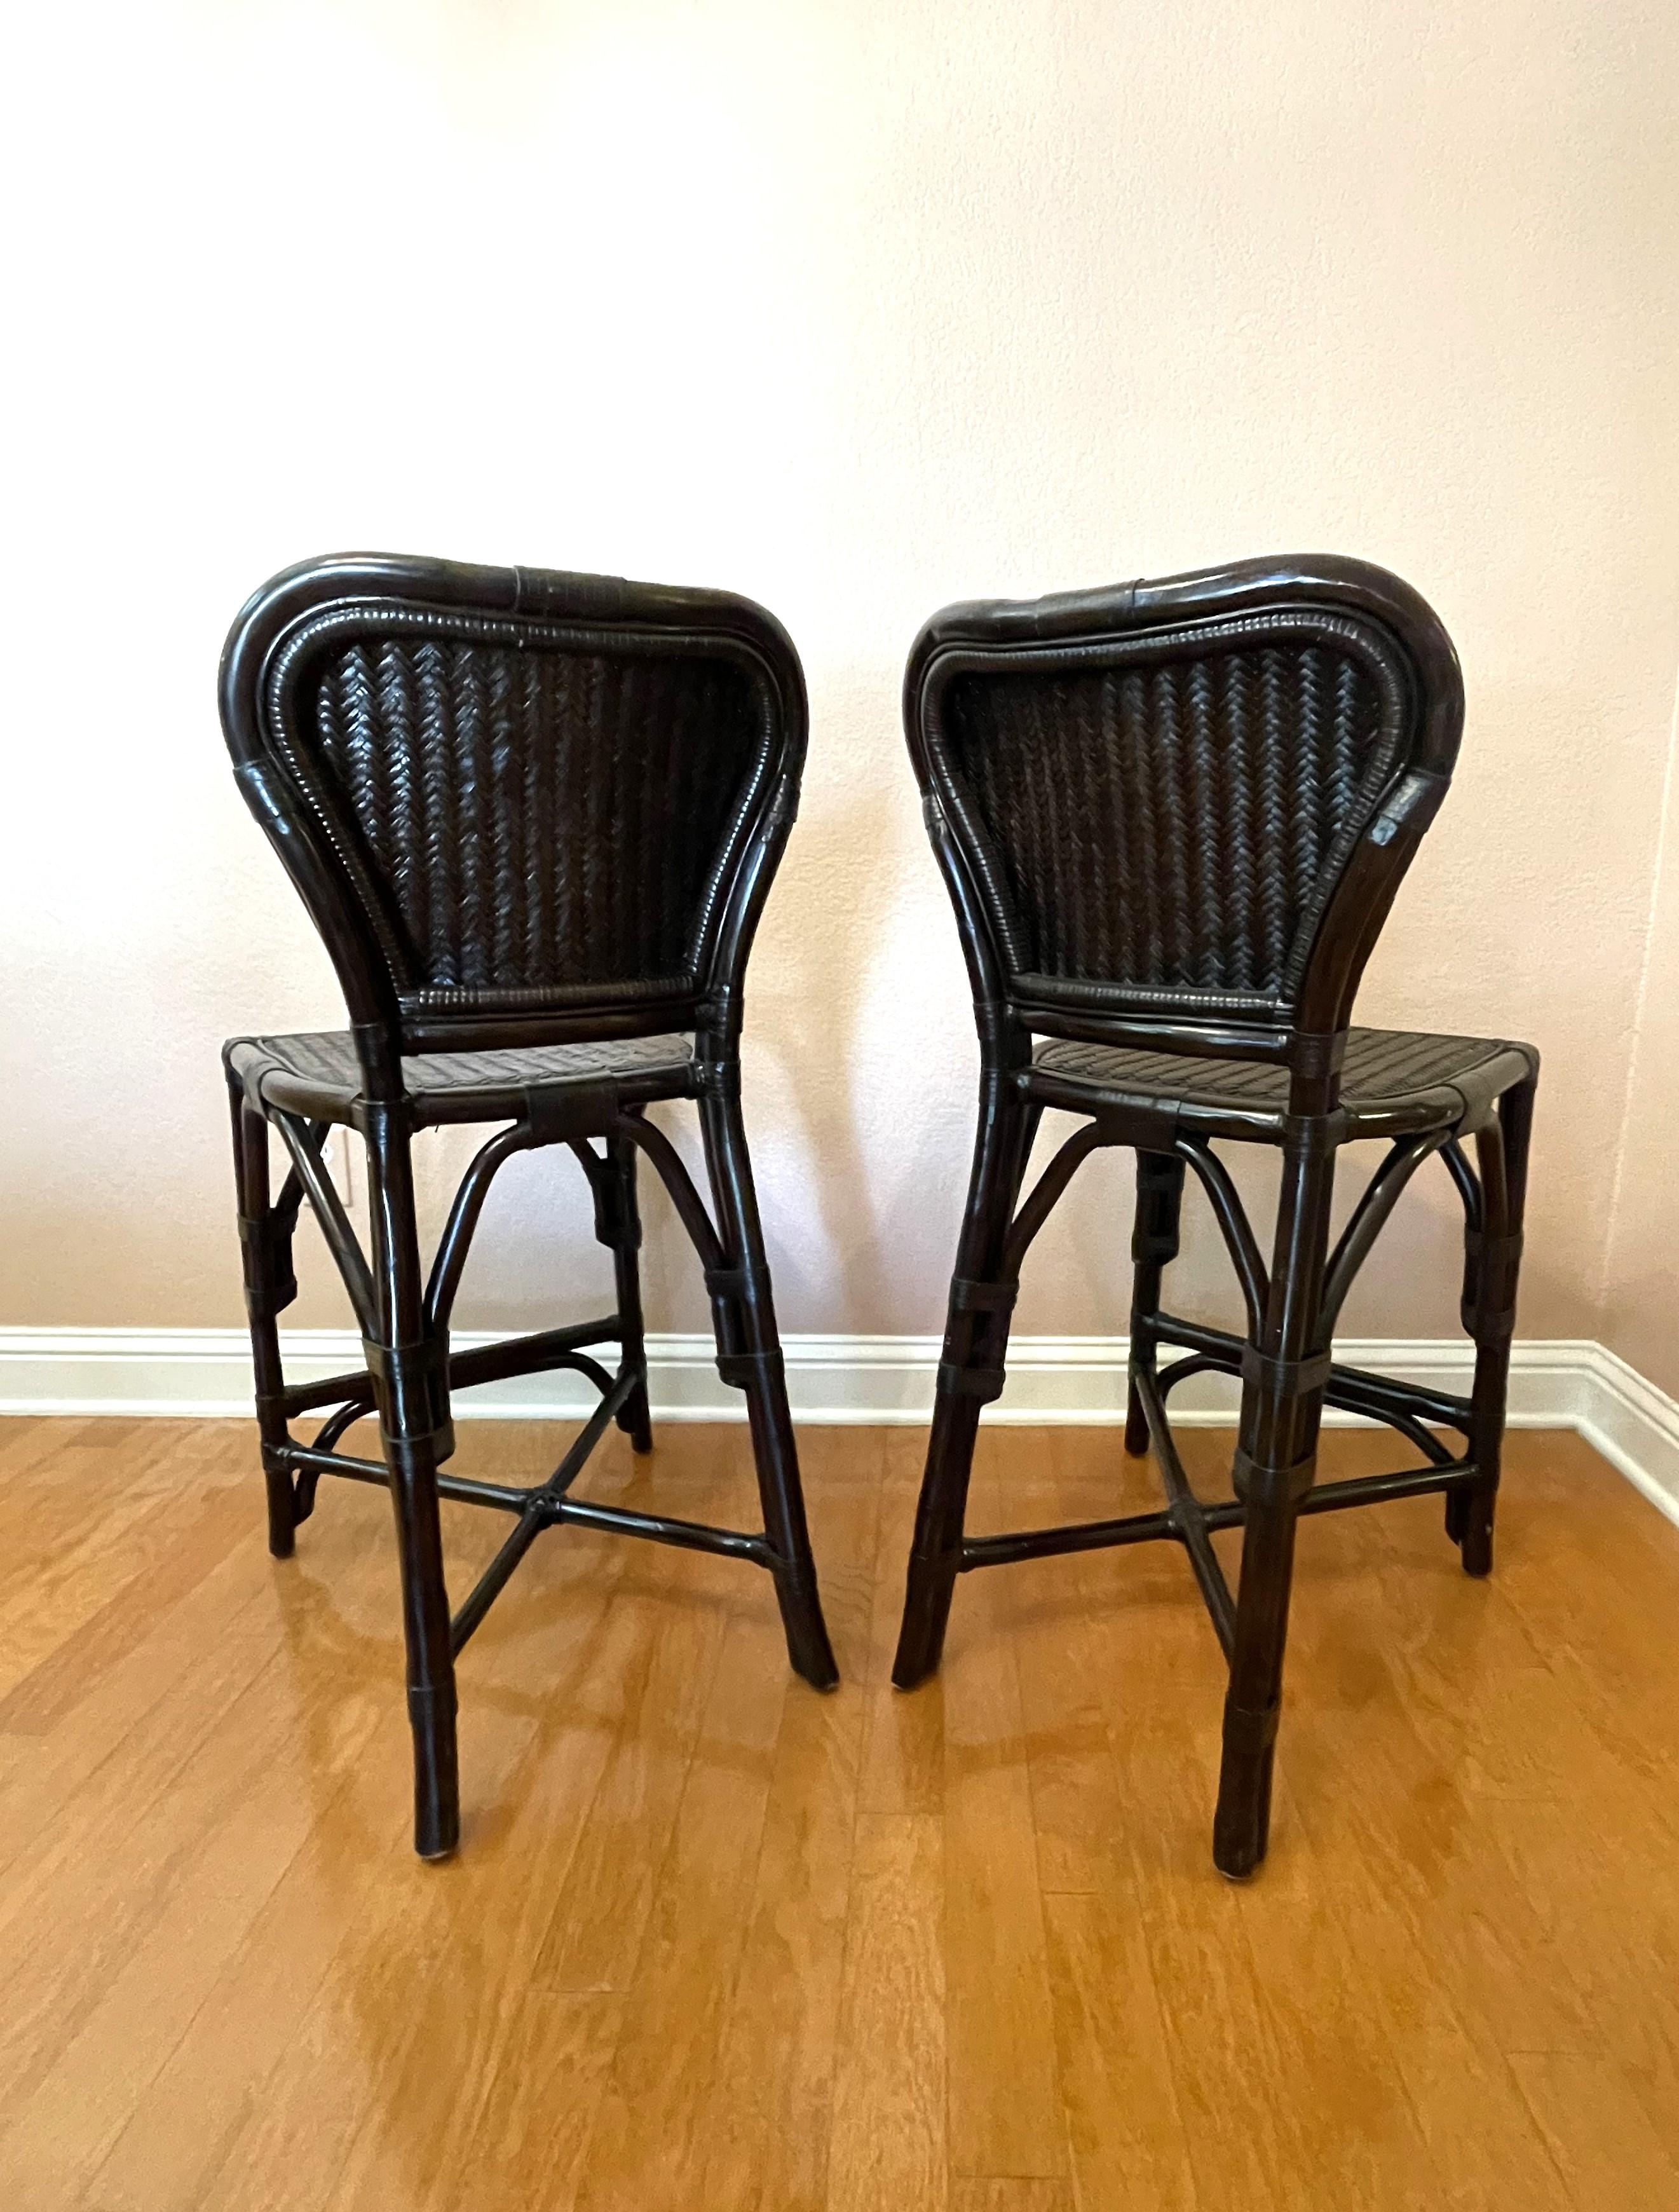 Black Rattan Bar Chairs In Excellent Condition For Sale In Austin, TX